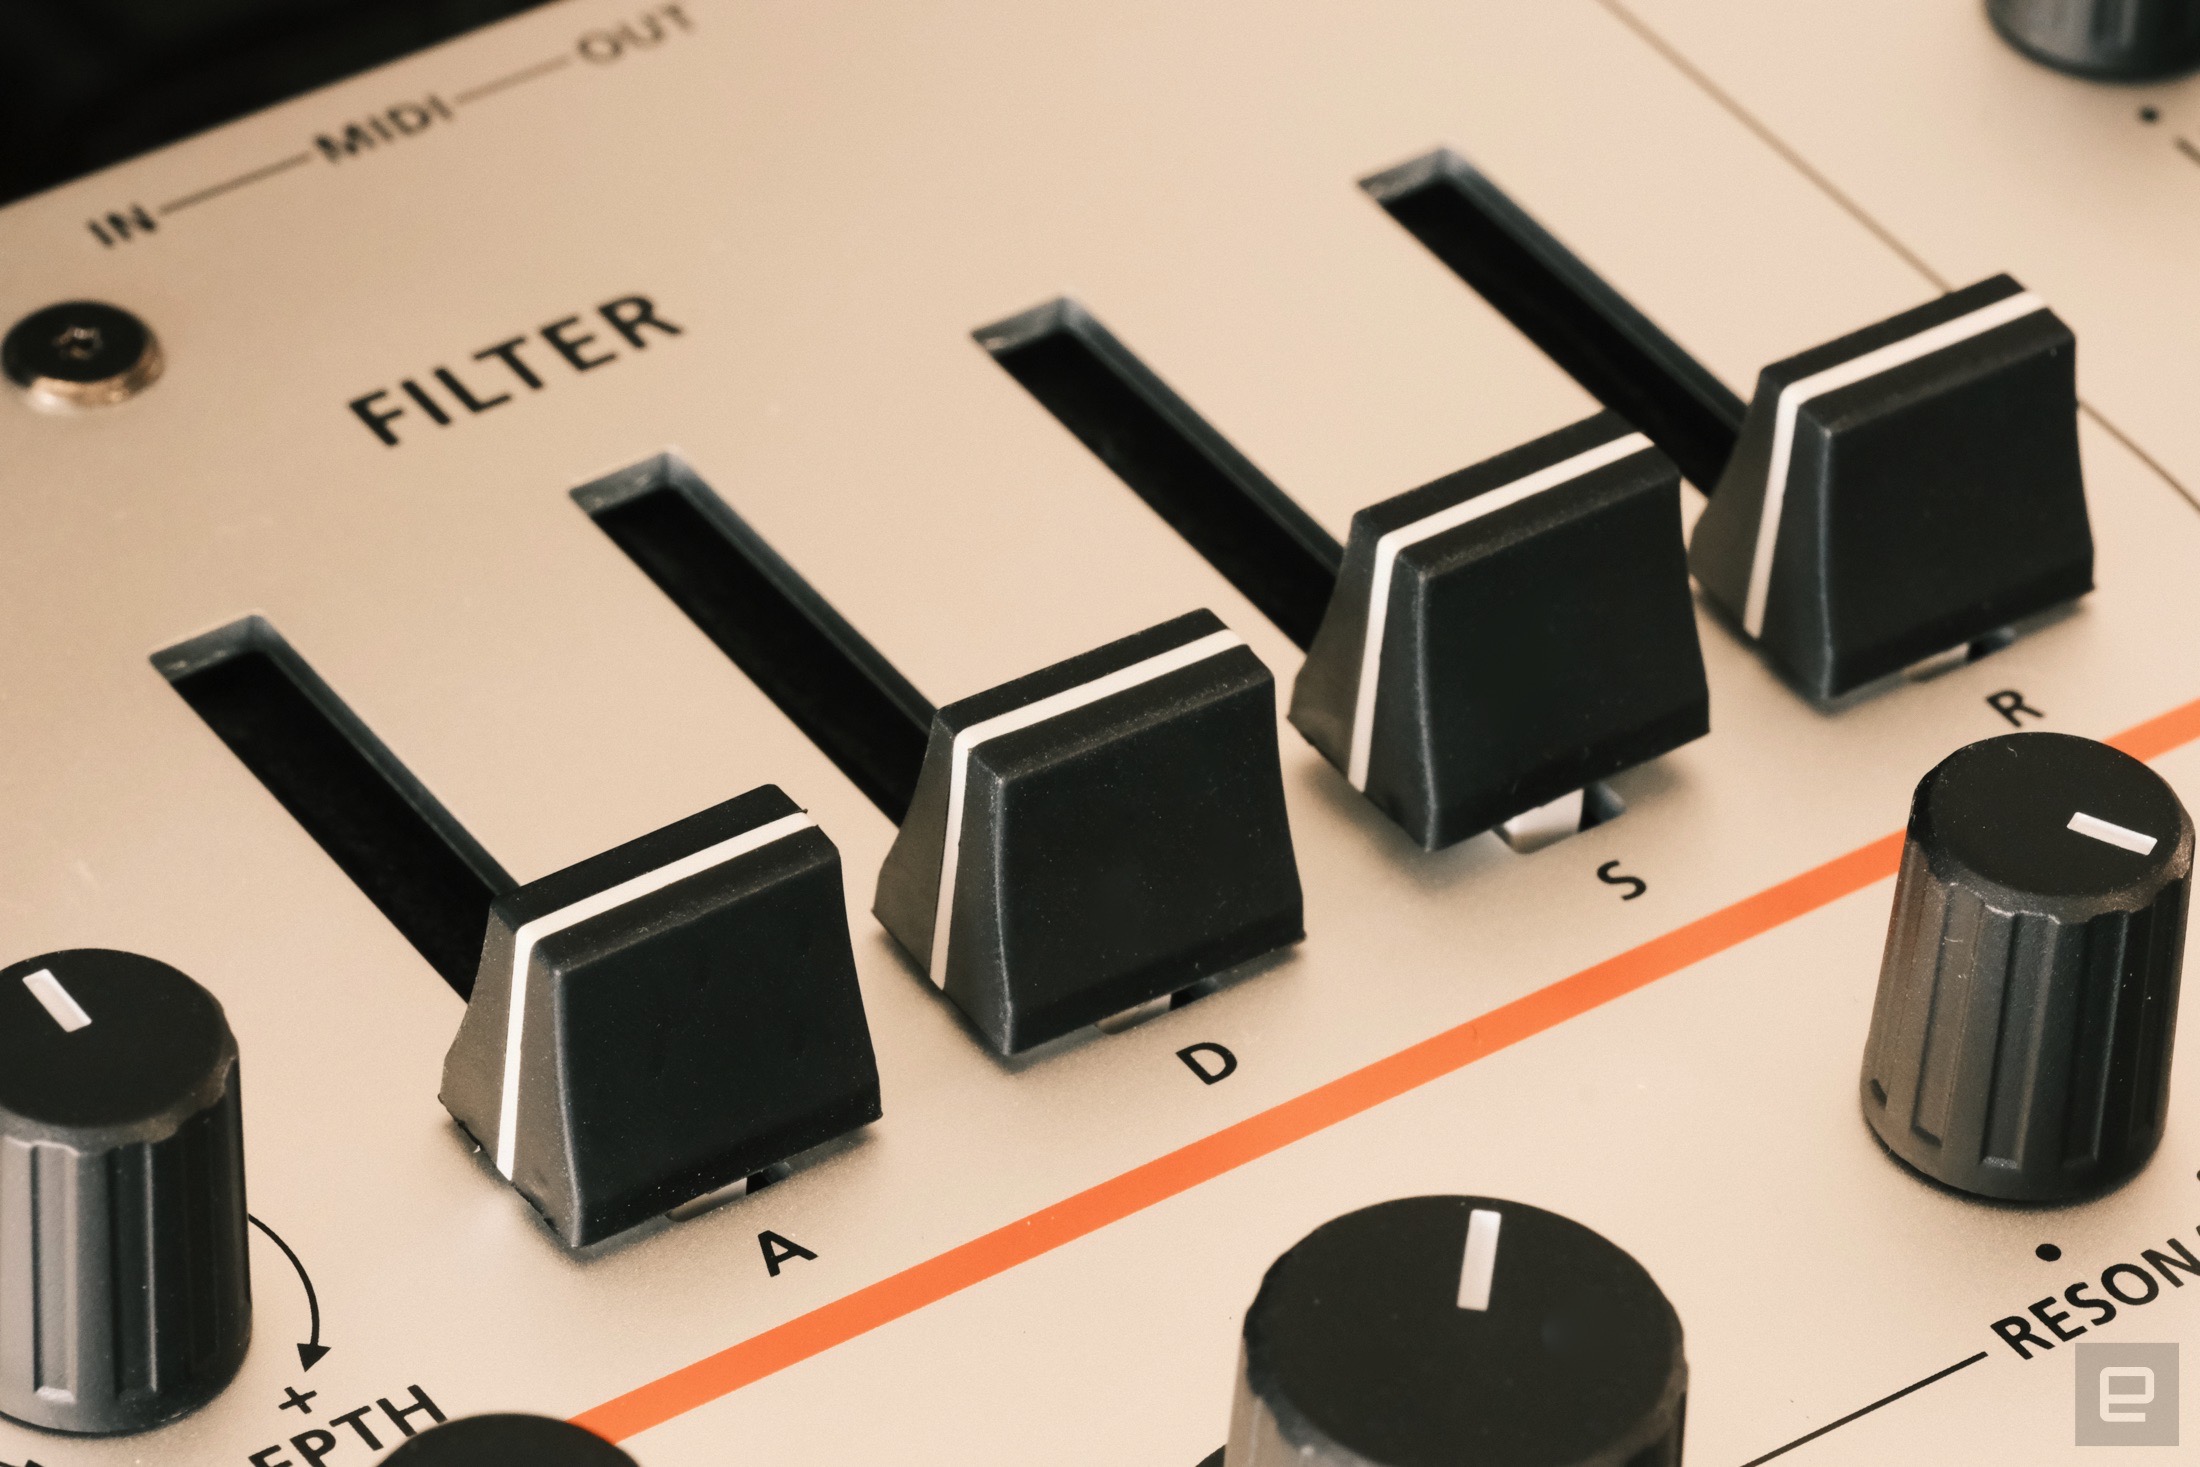 The ADSR faders for the filter envelope on the Roland Gaia 2.